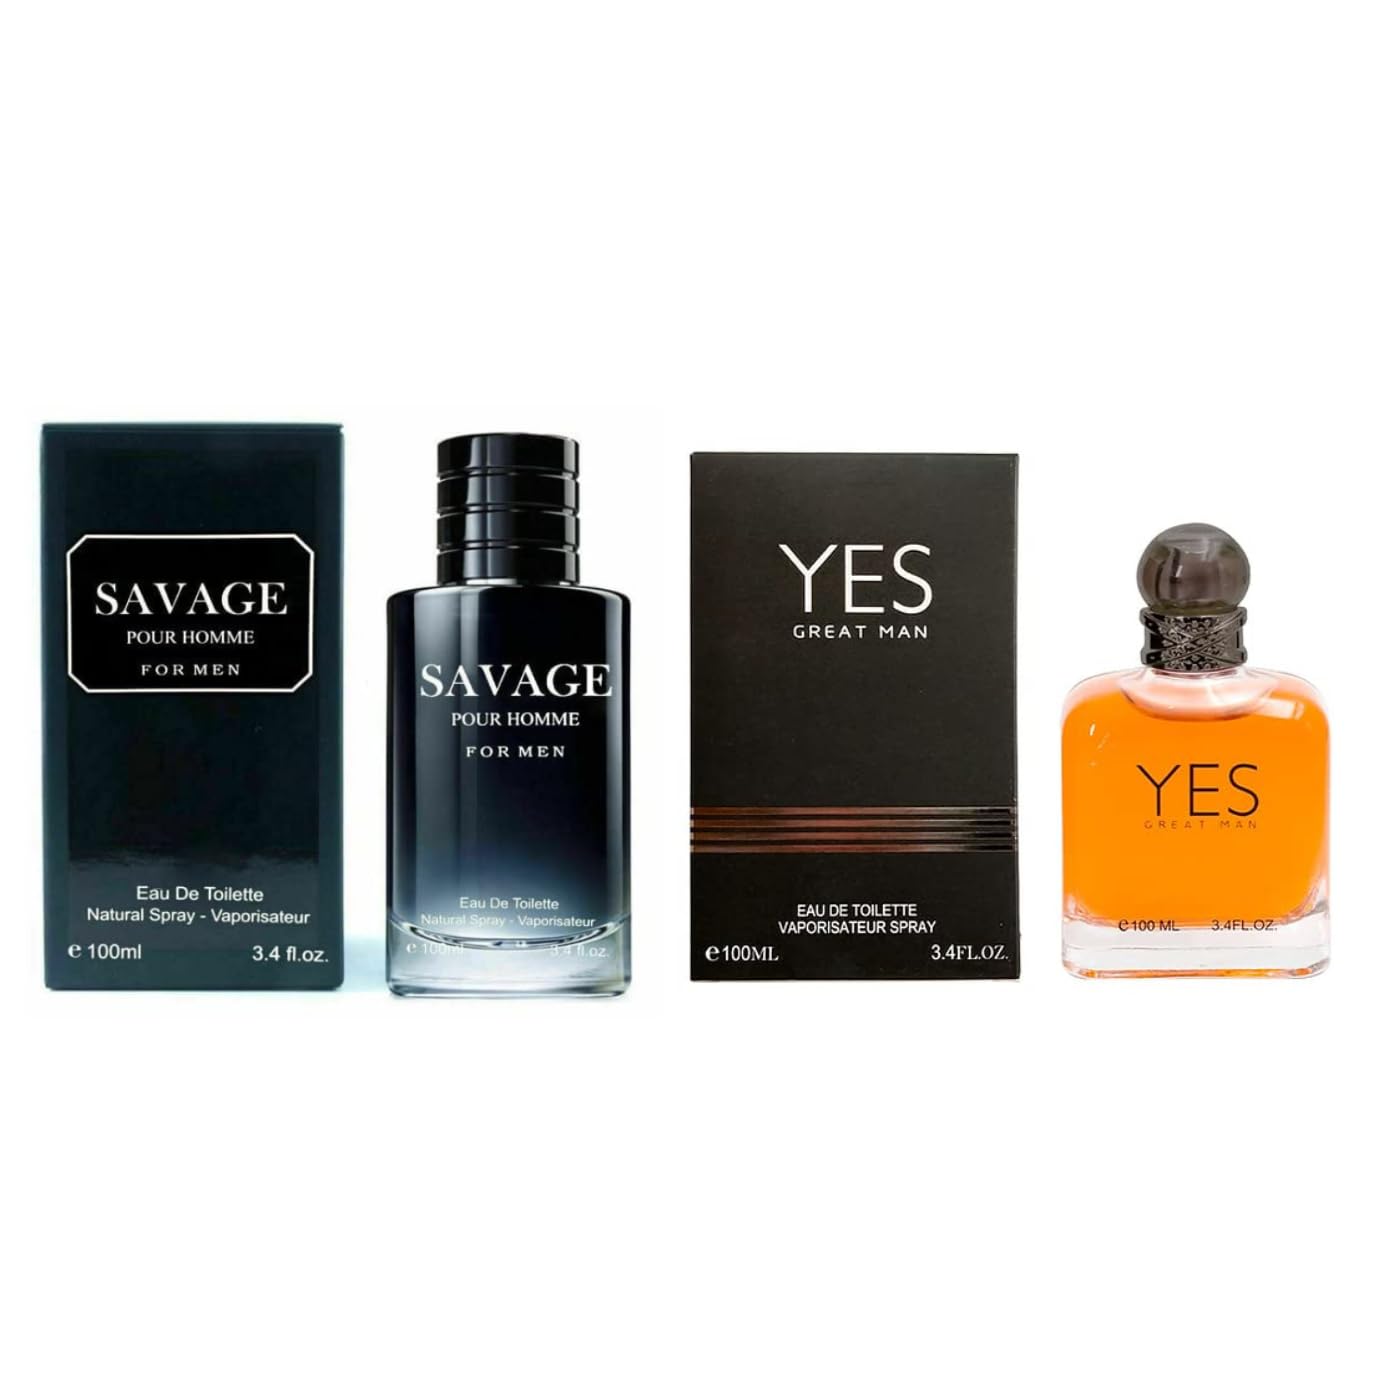 Savage Pour Home & Yes Great Cologne for Men, Eau De Toilette Natural Spray, (Inspired by Sauvage & Stronger With You) 3.4oz Fl Oz/100ml each